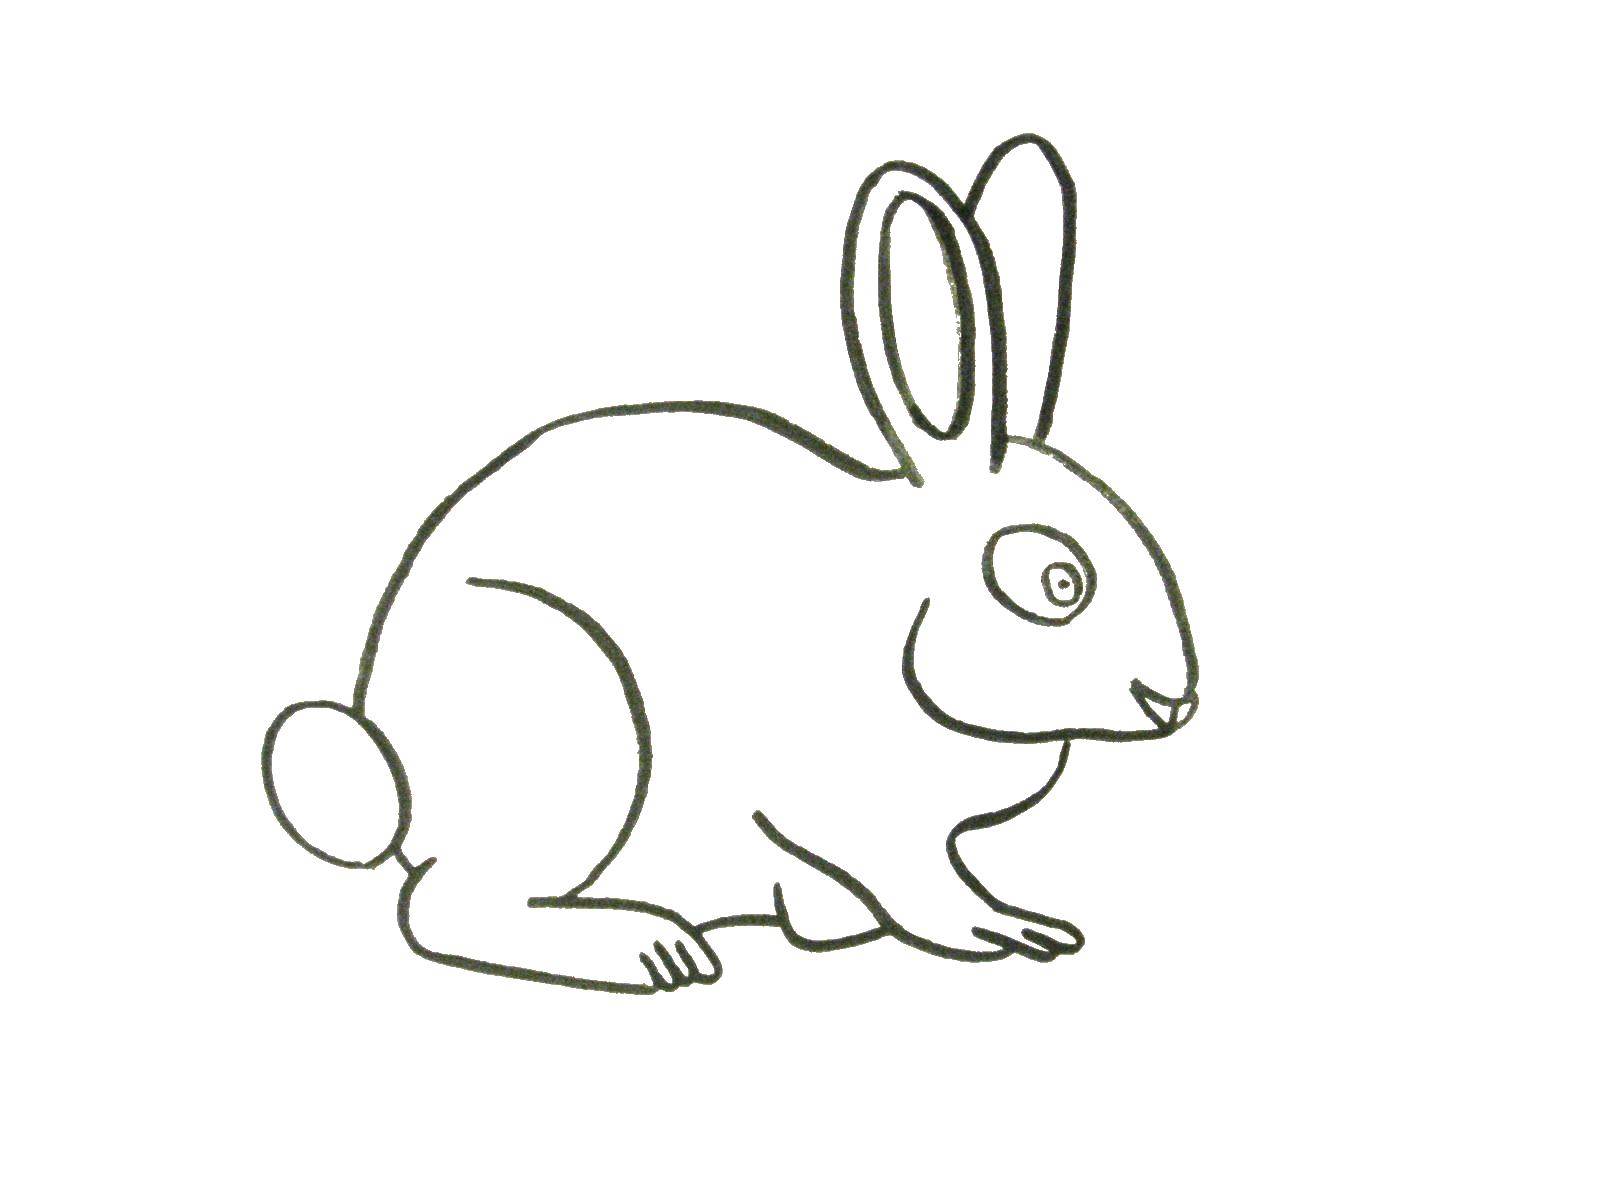 Coloring Border Bunny. Category The contour of the hare to cut. Tags:  outline , hare, ears.